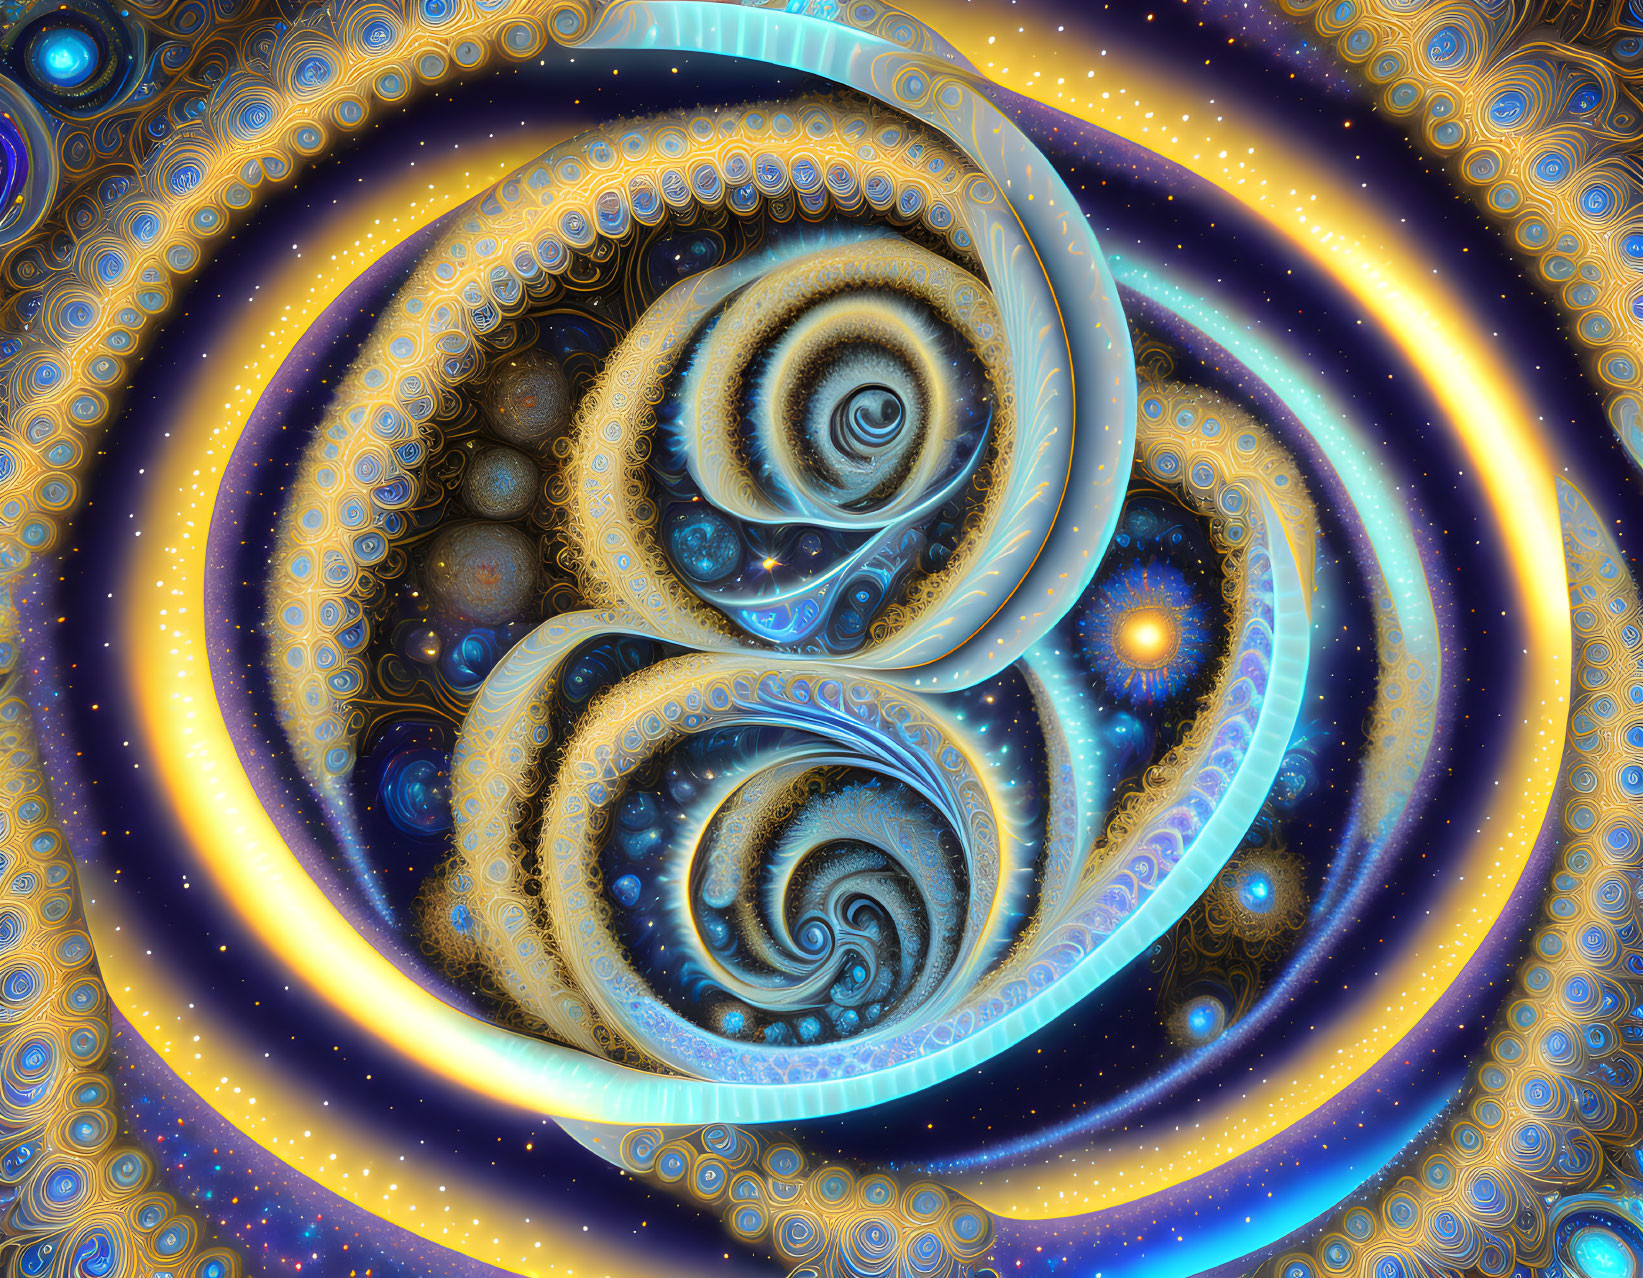 Abstract Blue and Gold Fractal Art with Swirling Patterns